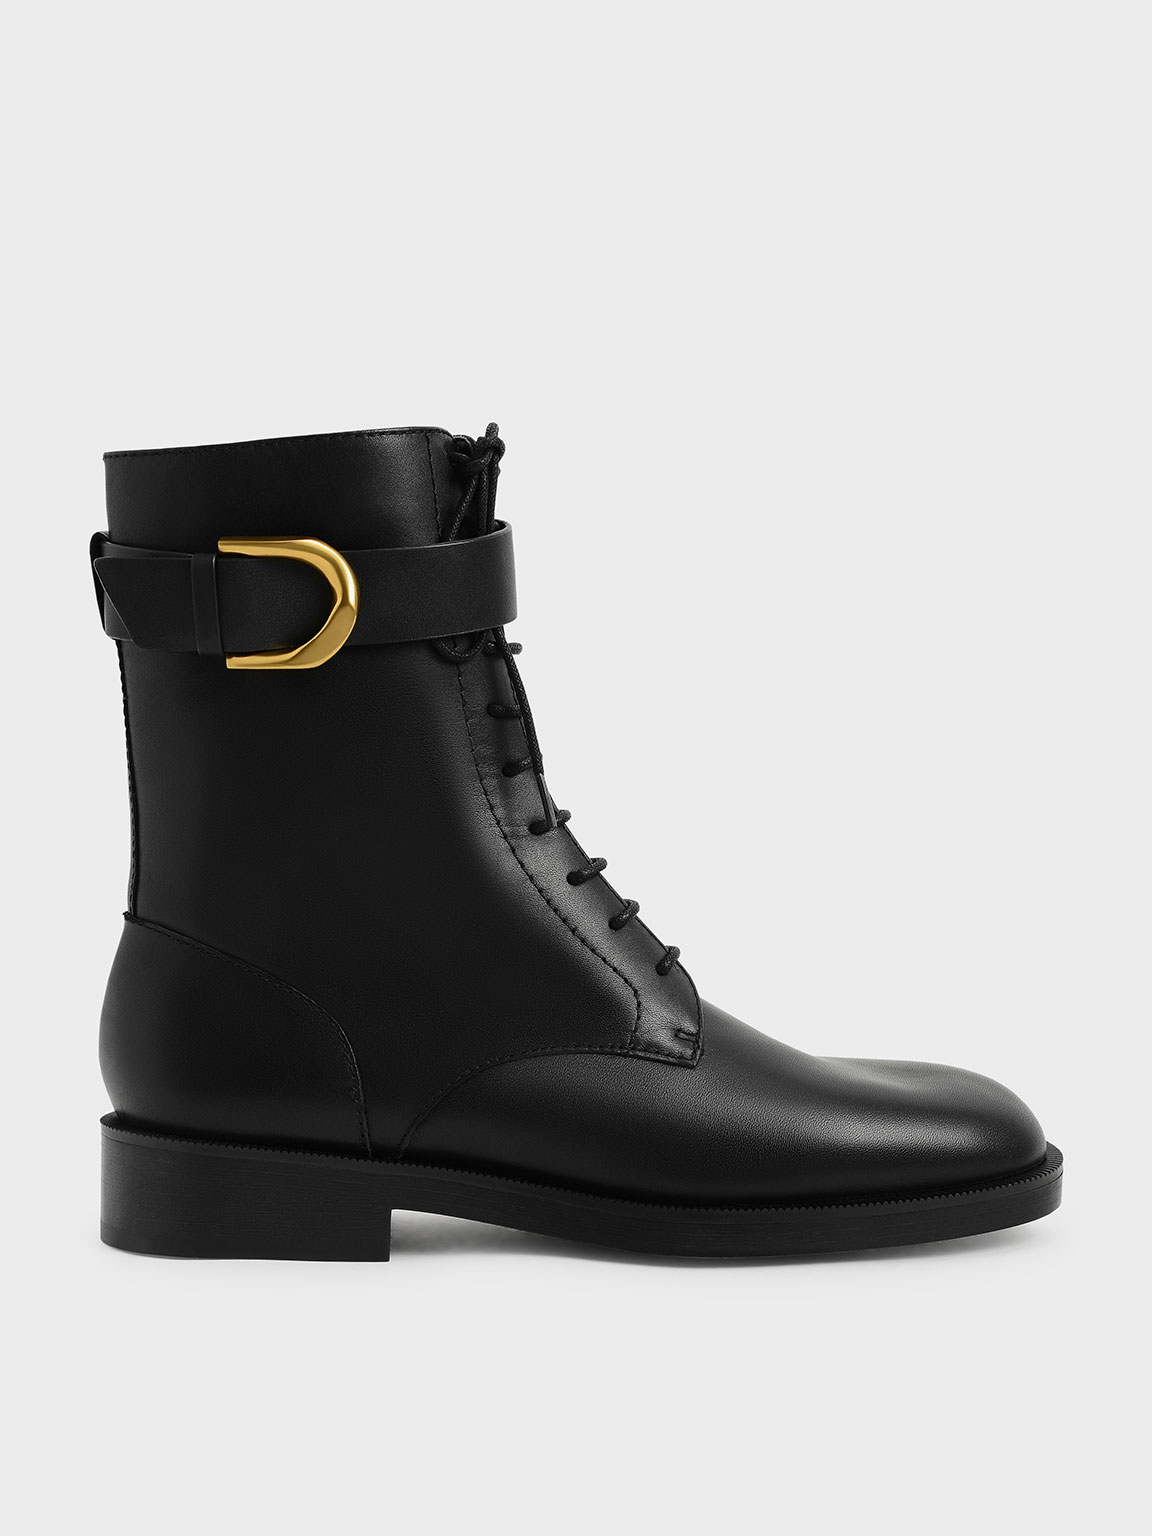 These Affordable High-Street Boots Look so Expensive | Who What Wear UK